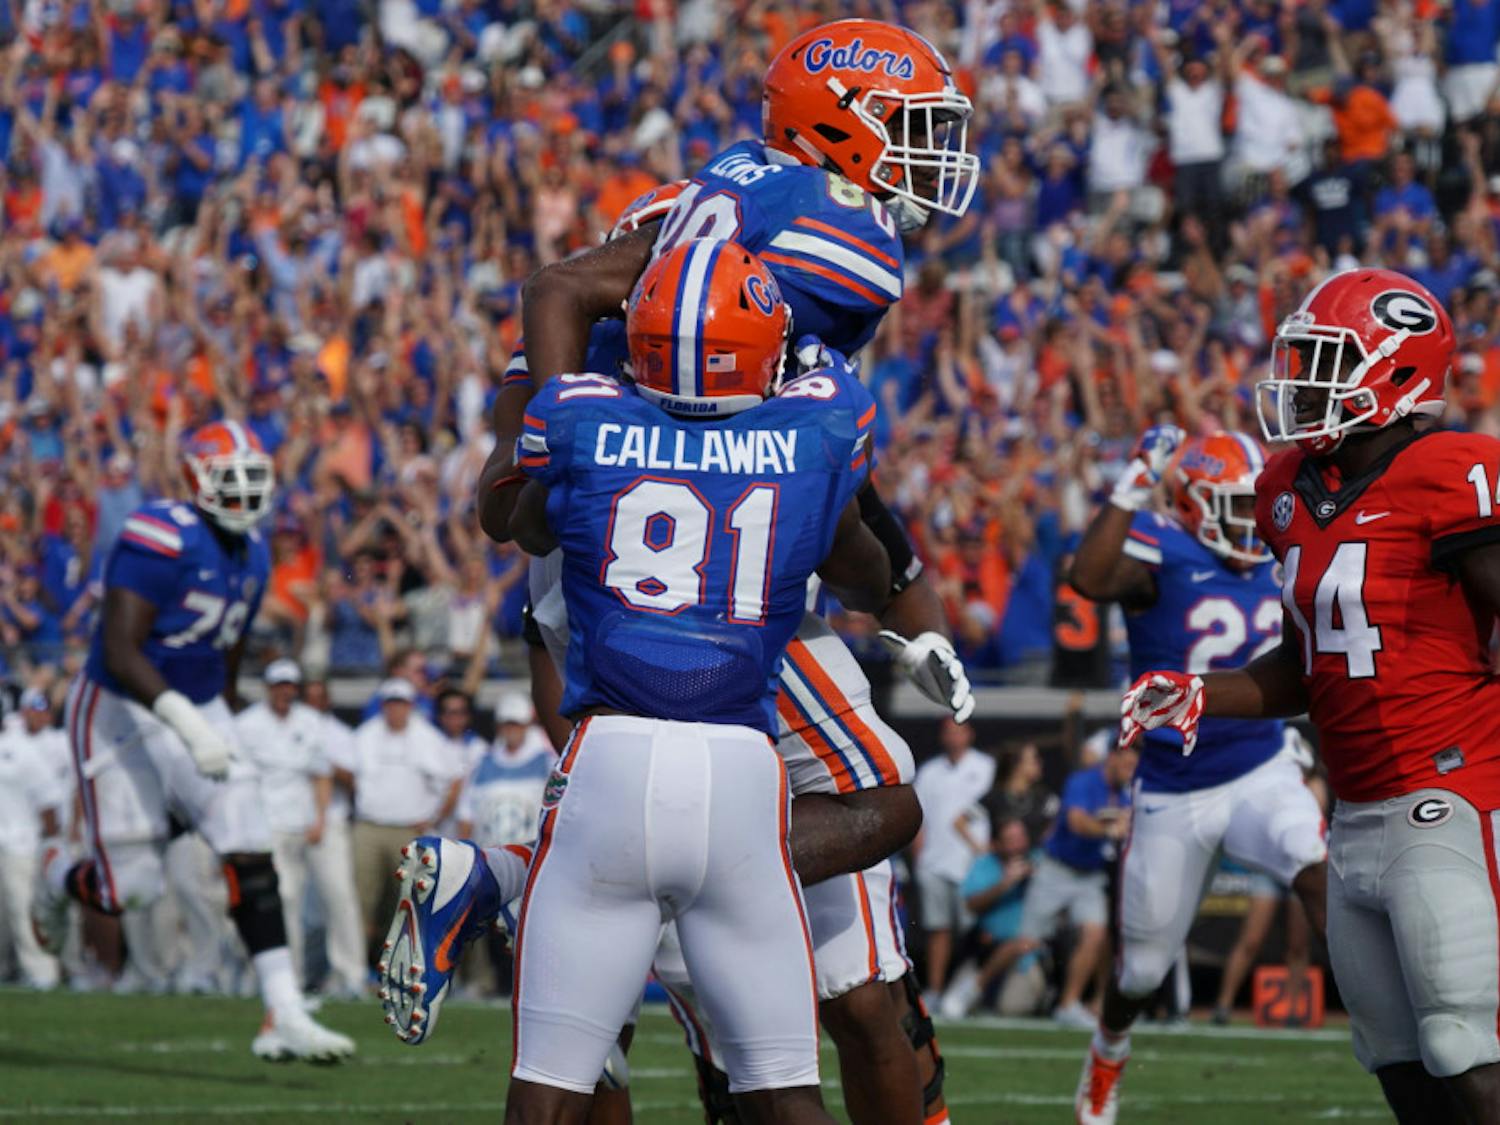 Antonio Callaway celebrates with C'yontai Lewis during UF's 24-10 win over Georgia on Oct. 29 at EverBank Field.